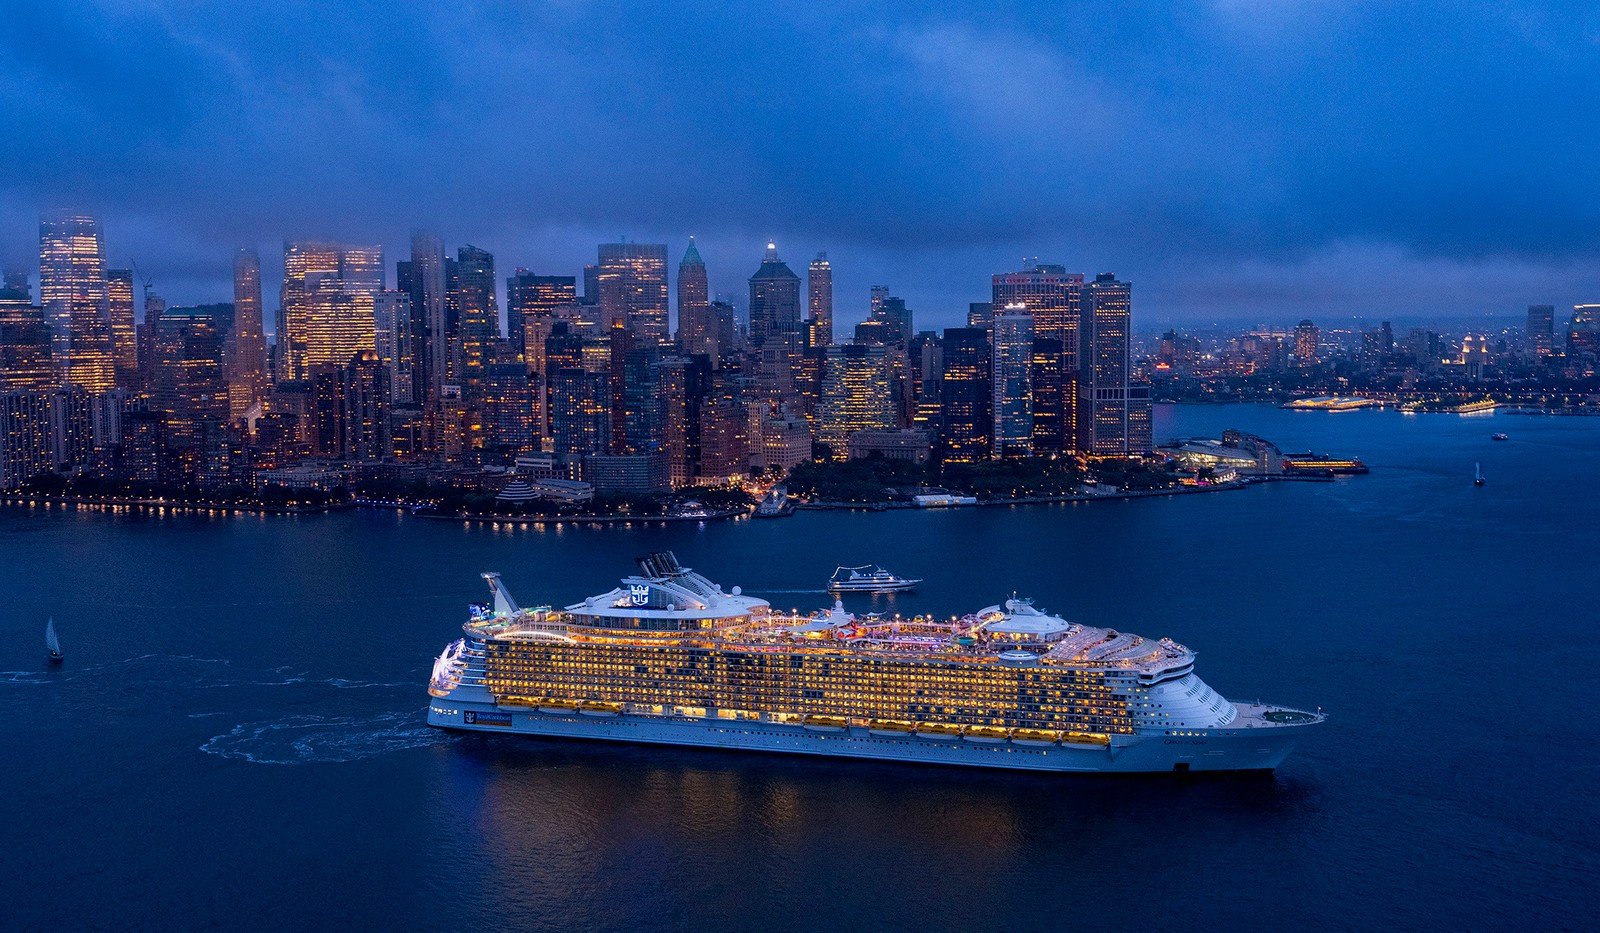 Photos: Oasis of the Seas departs New York Harbor for first time | Royal Caribbean Blog